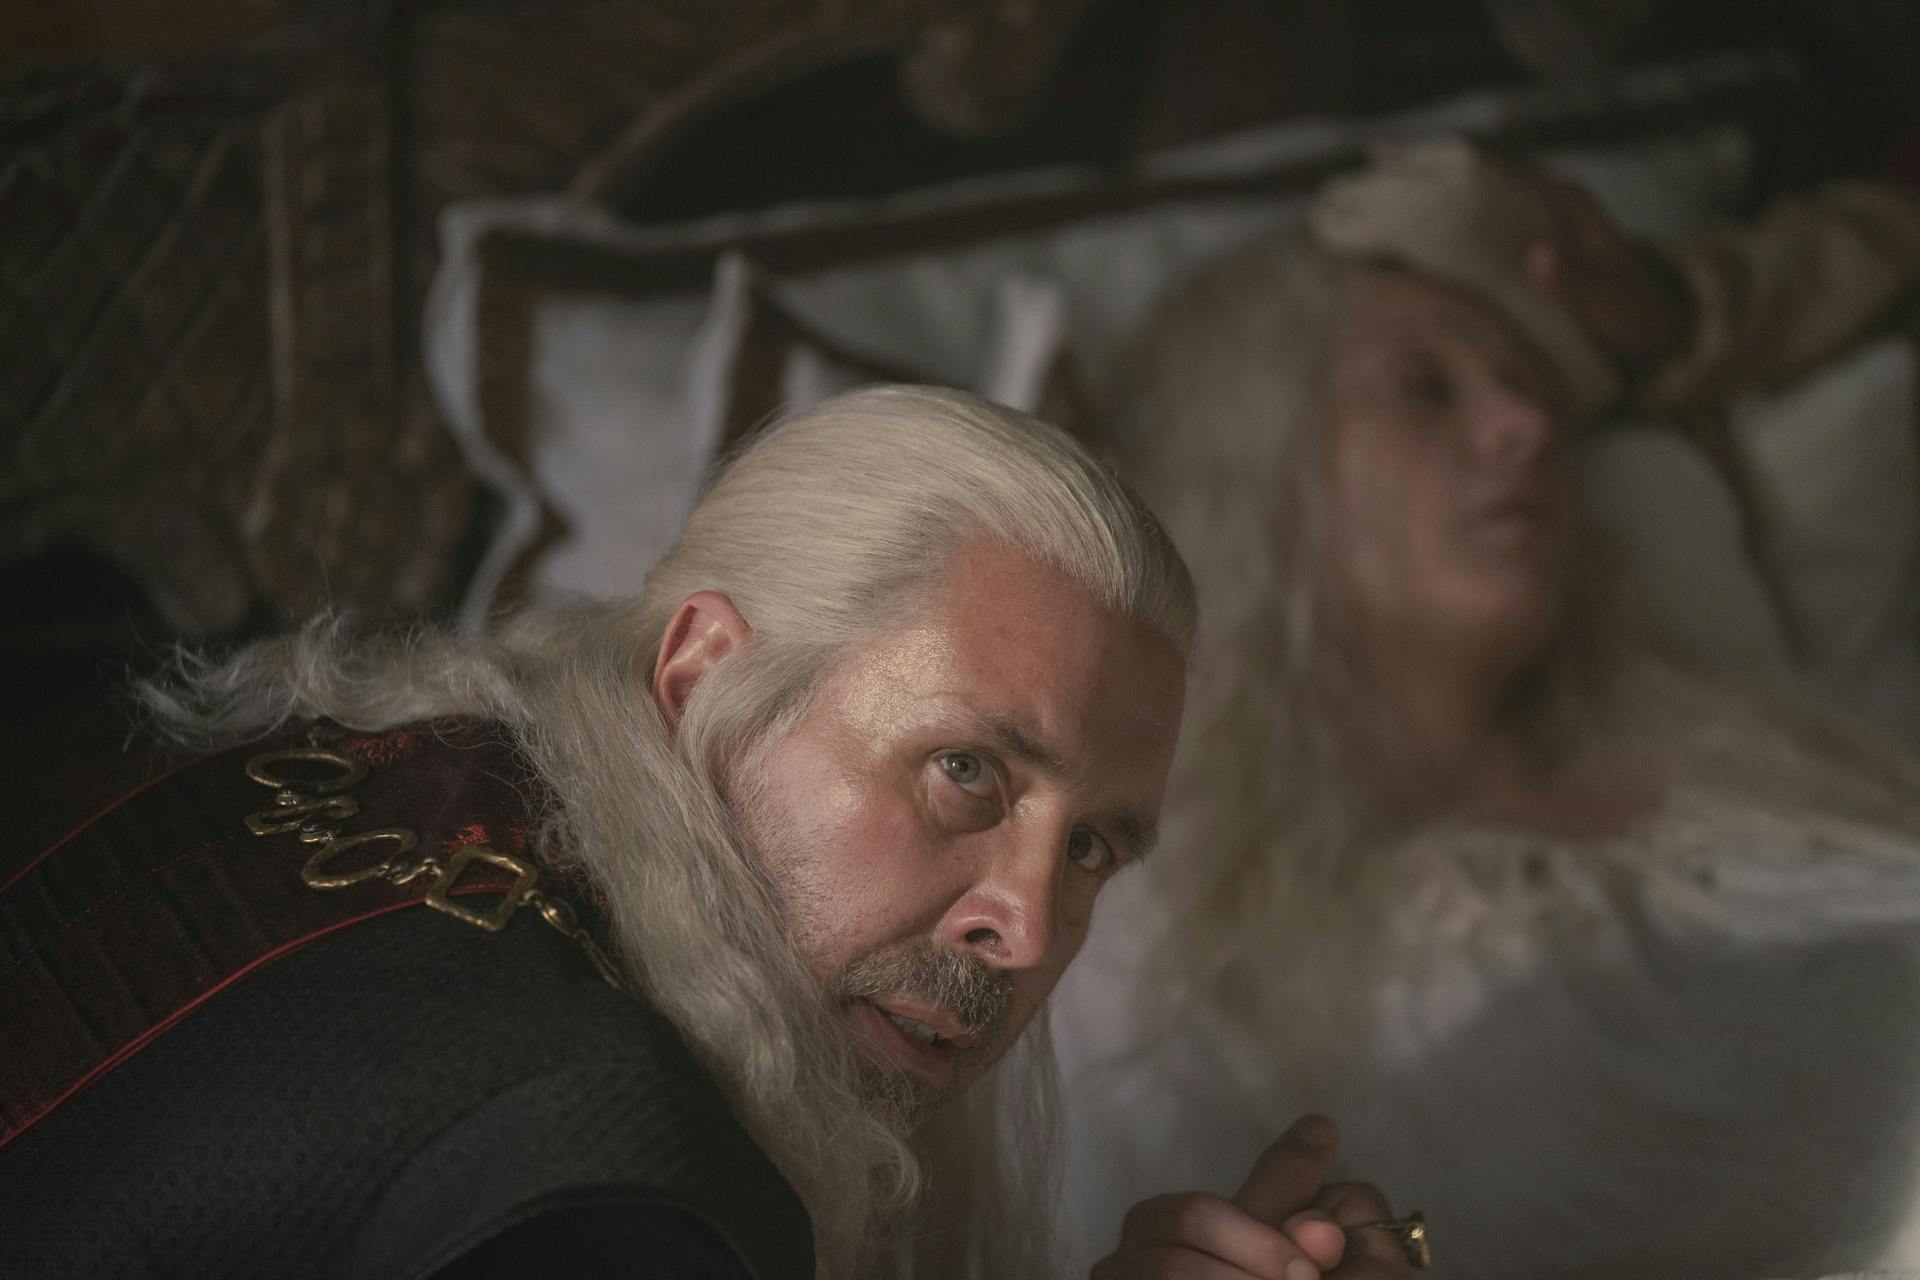 viserys targaryen (left) and aemma arryn (right) in house of the dragon